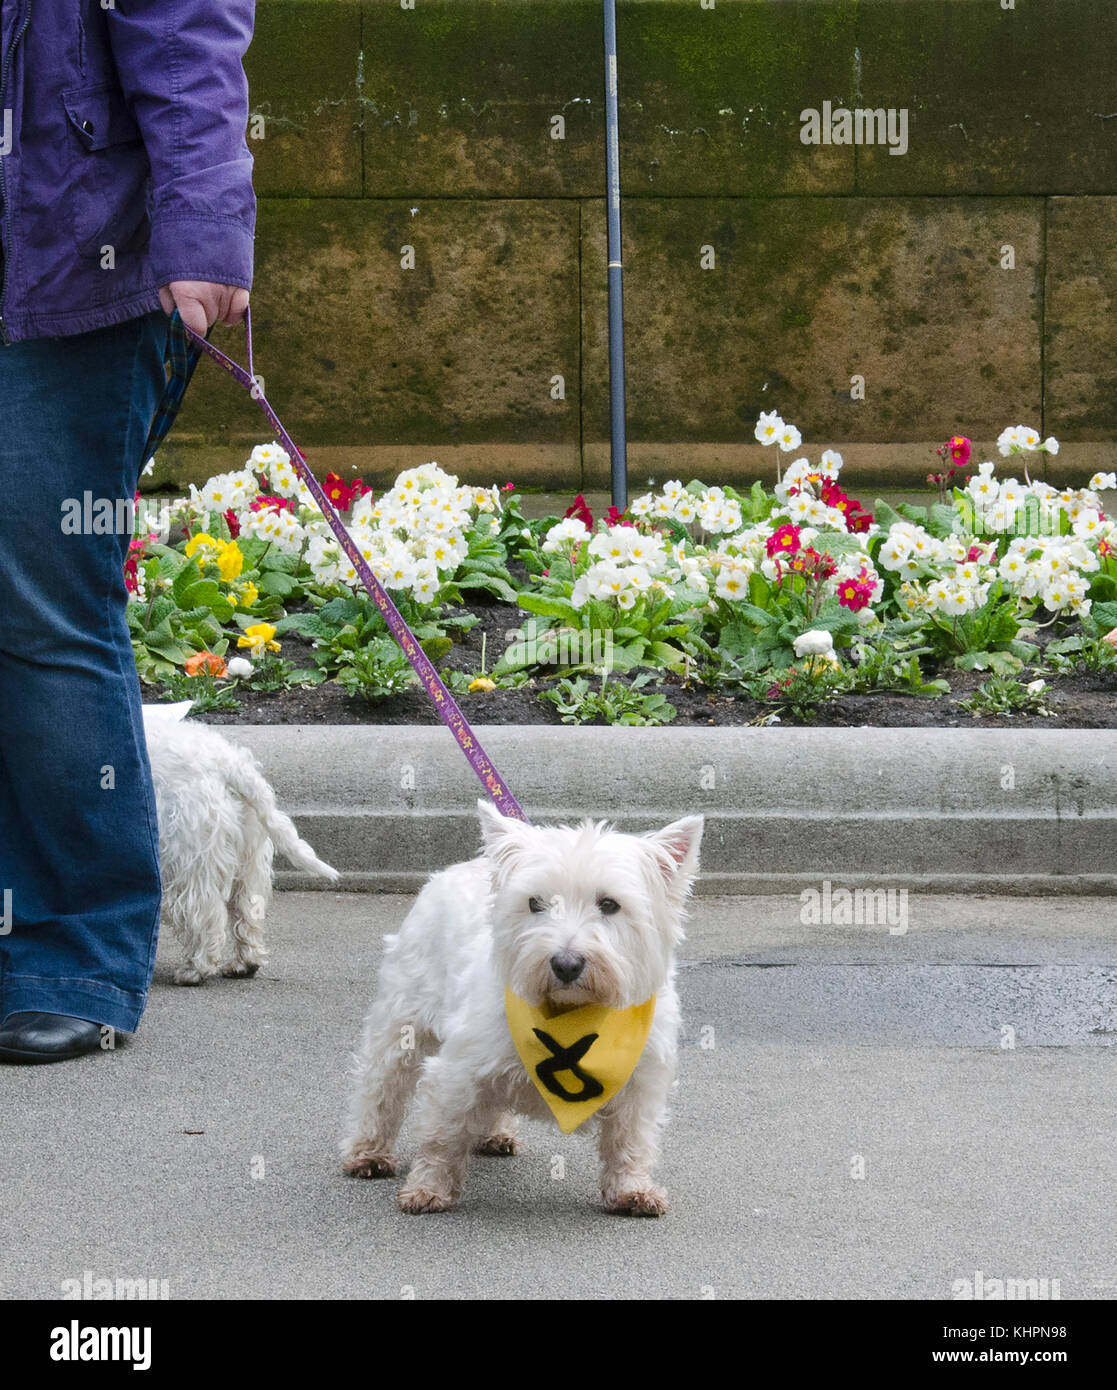 GLASGOW, SCOTLAND- APRIL 04 2015: A Scottish Terrier, also known as a Scottie, wears an SNP scarf at the the Scrap Trident demonstration. Stock Photo